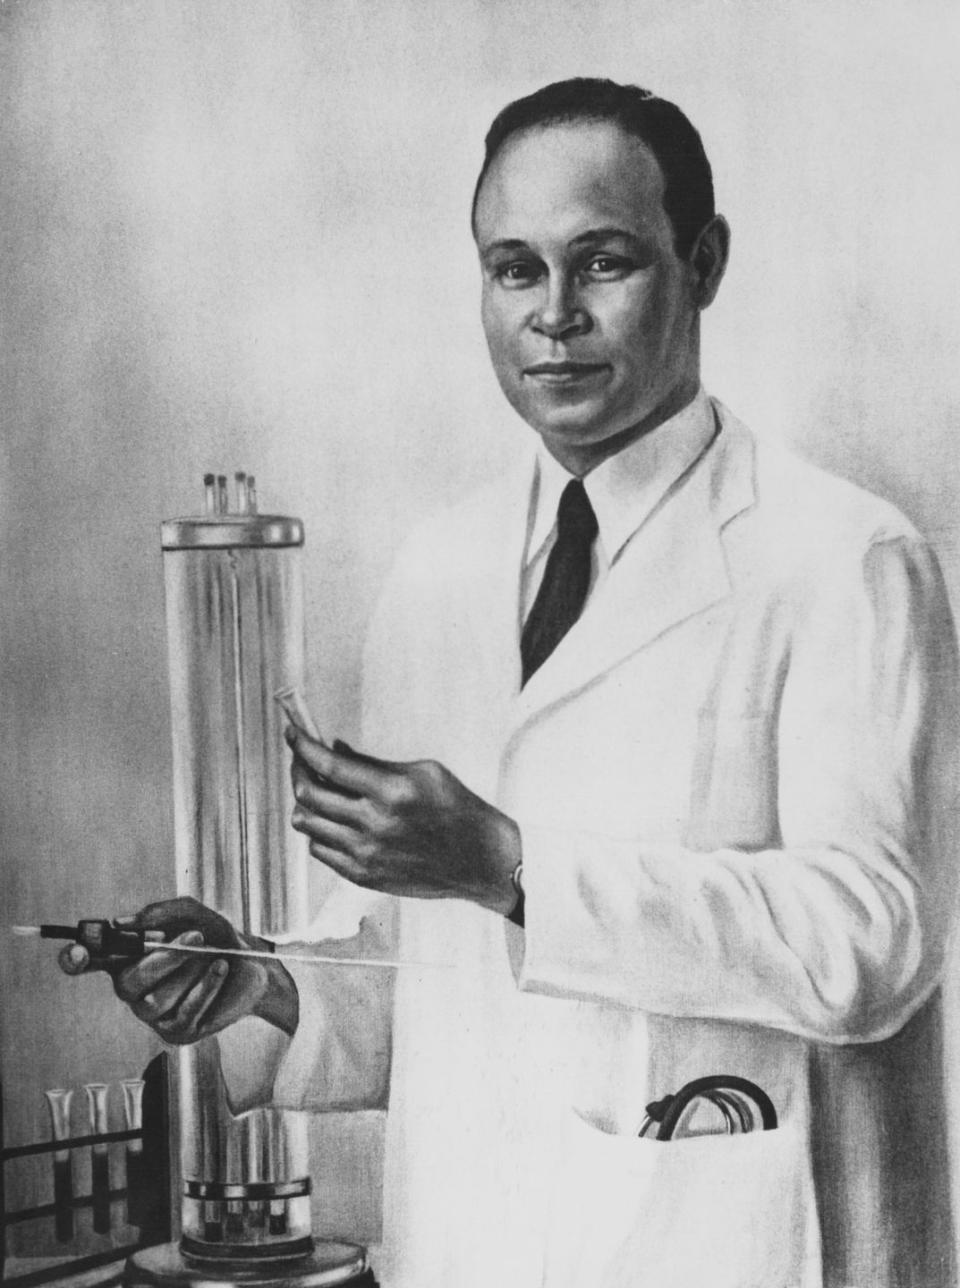 charles drew looks directly forward, wearing a lab coat and standing next to laboratory equipment